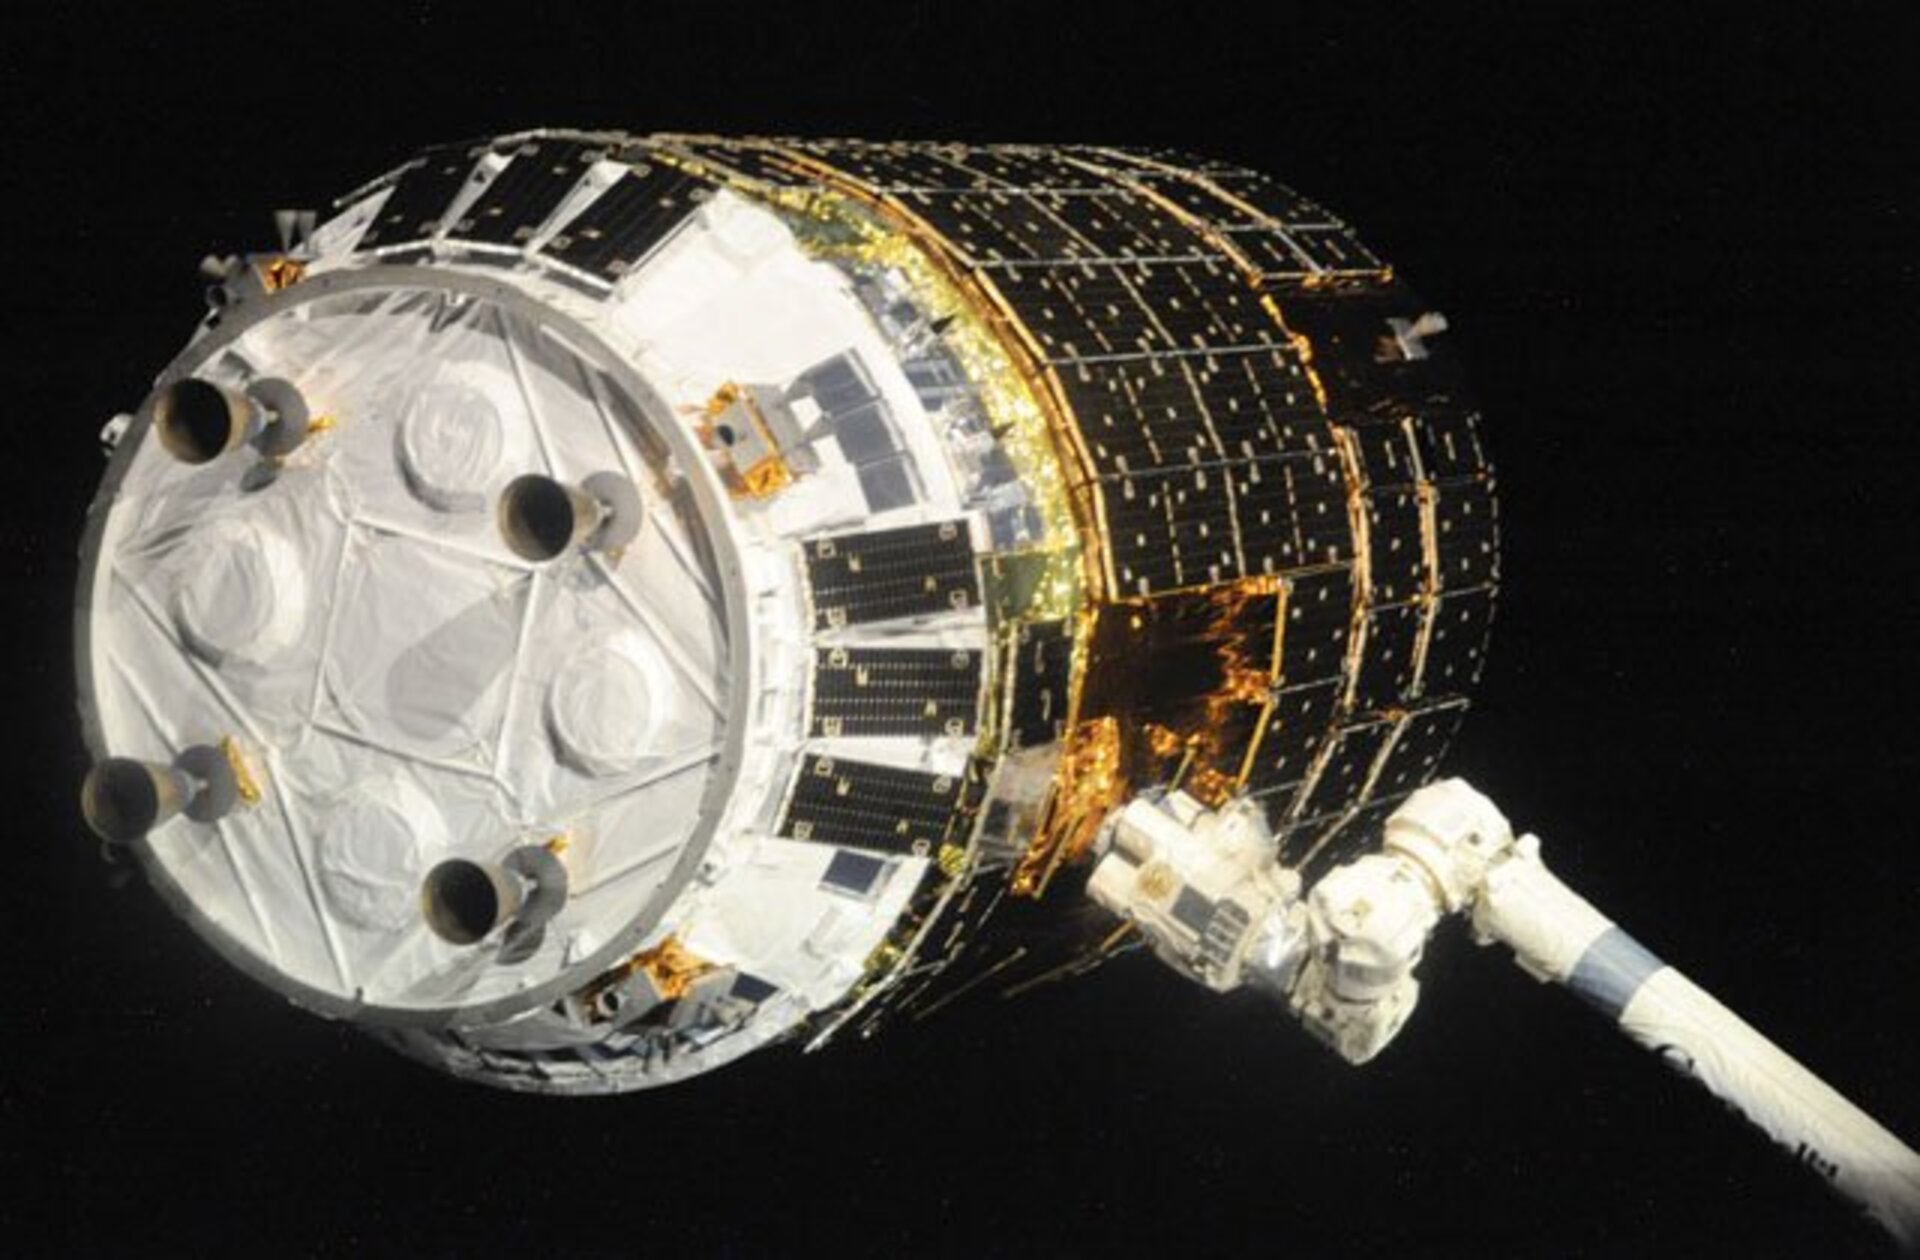 HTV-1 is grappled using Canadarm2